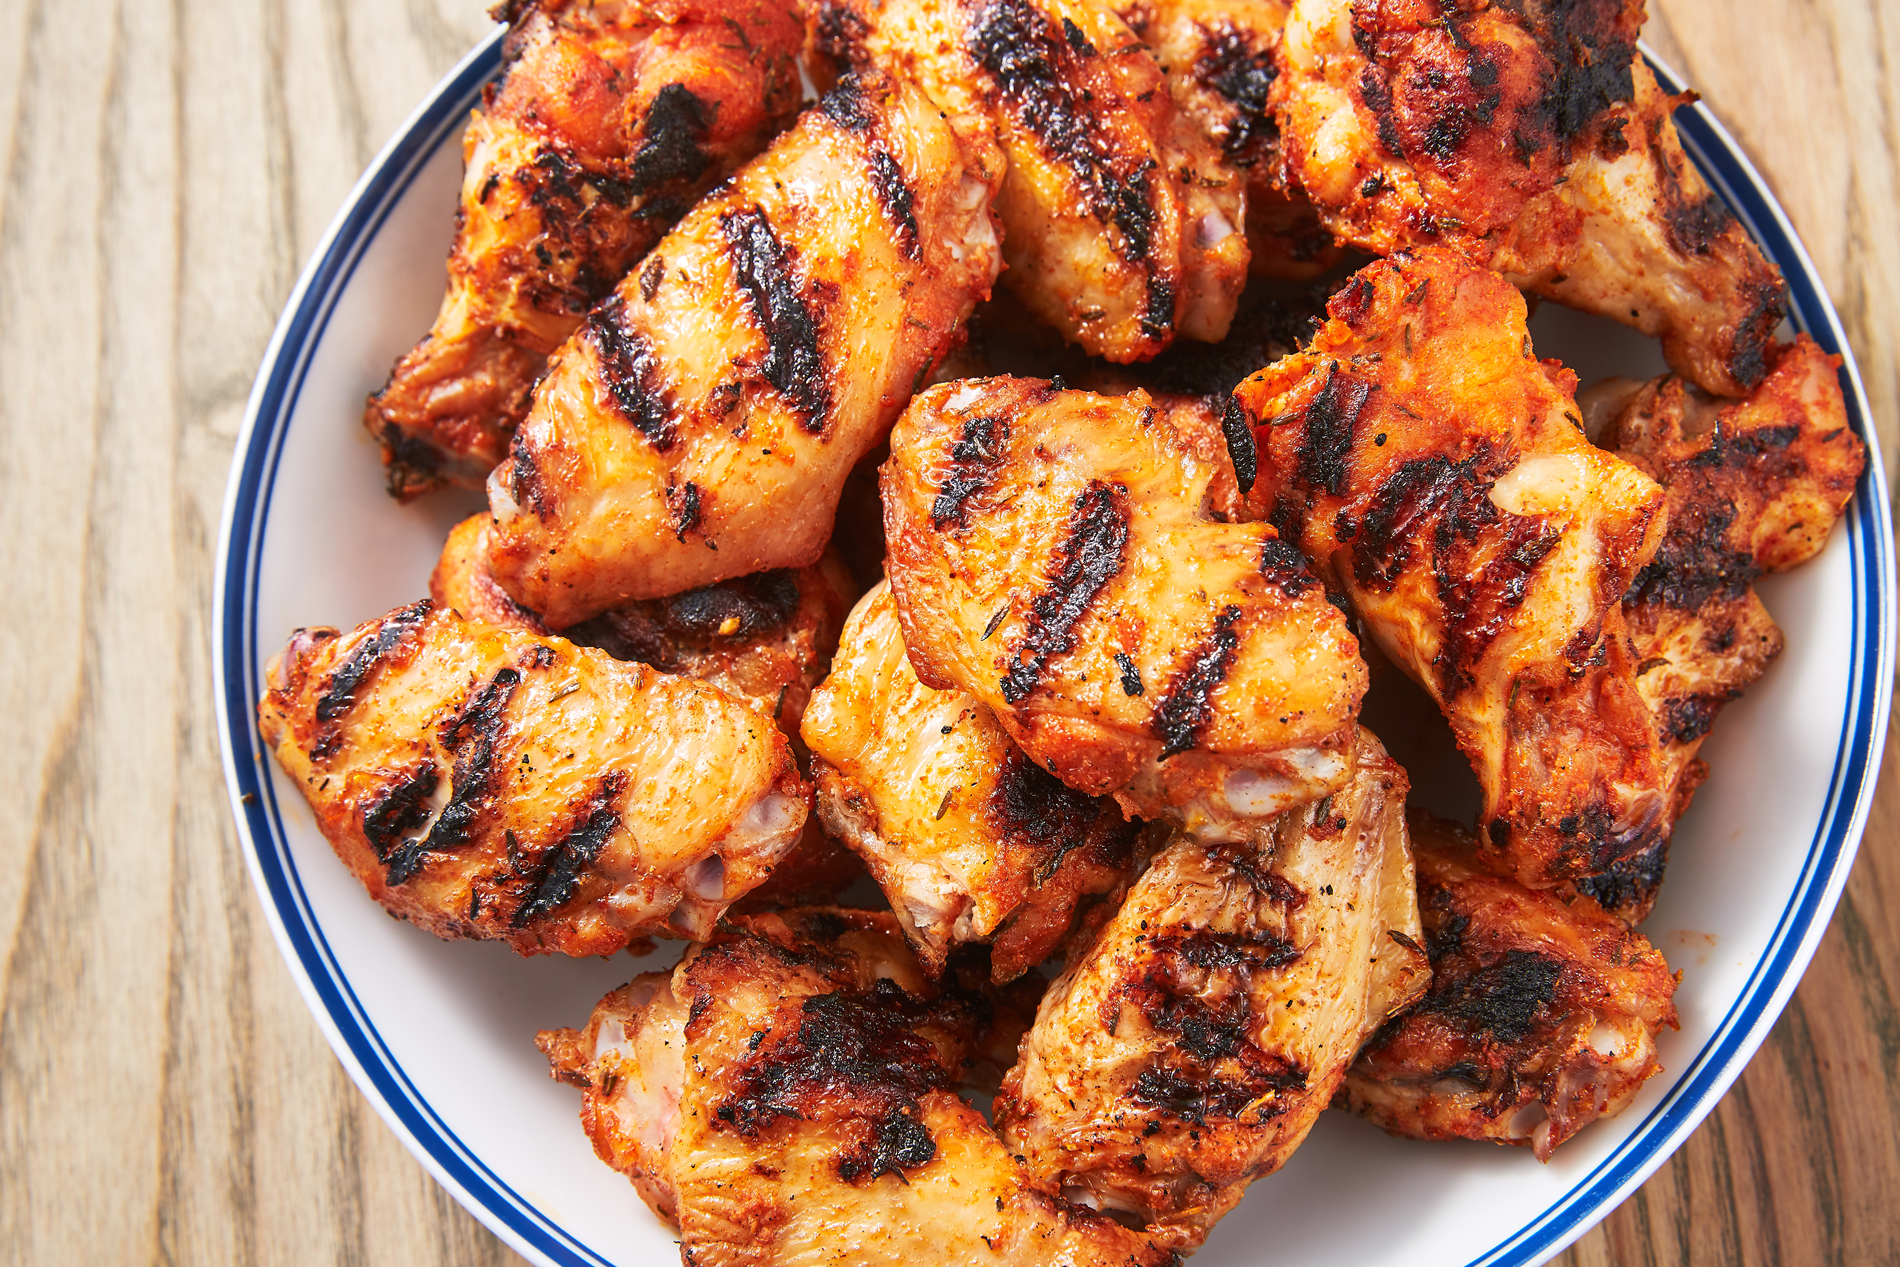 Best Grilled Chicken Wings Recipe How To Make Grilled Chicken Wings,Measurement Of 1 Cup In Ml